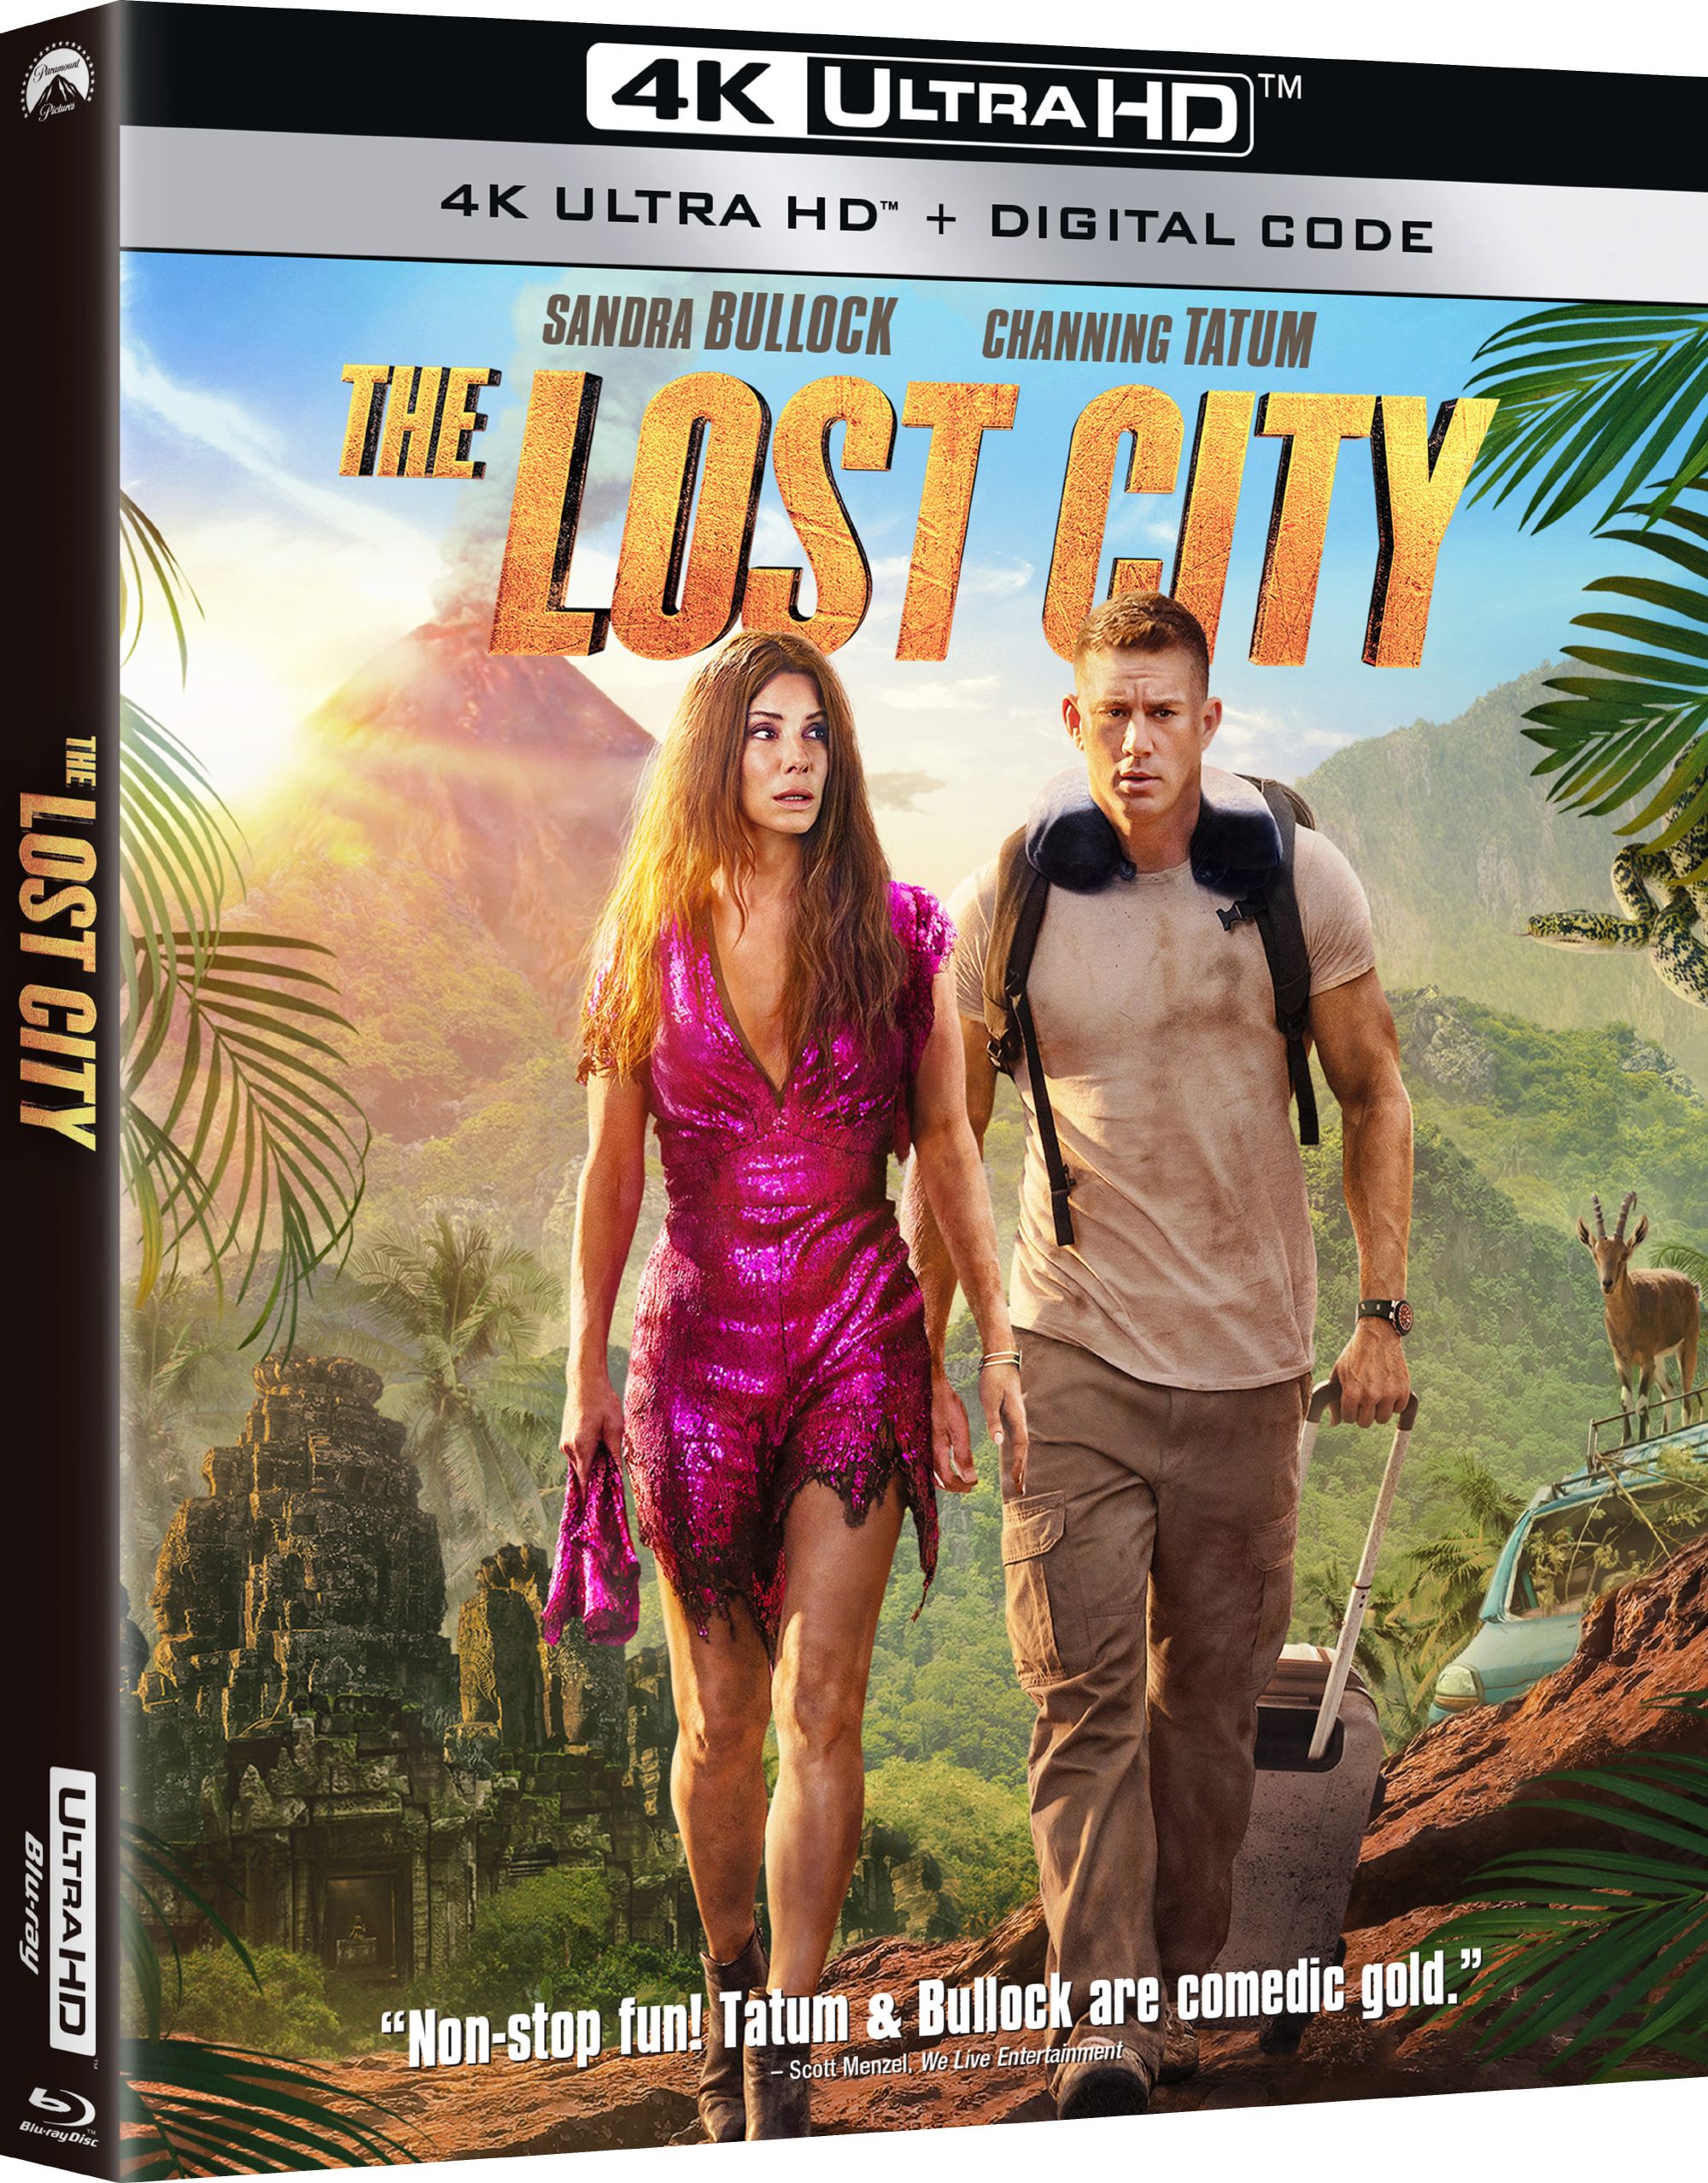 The Lost City Blu-ray & Streaming Release Date Revealed